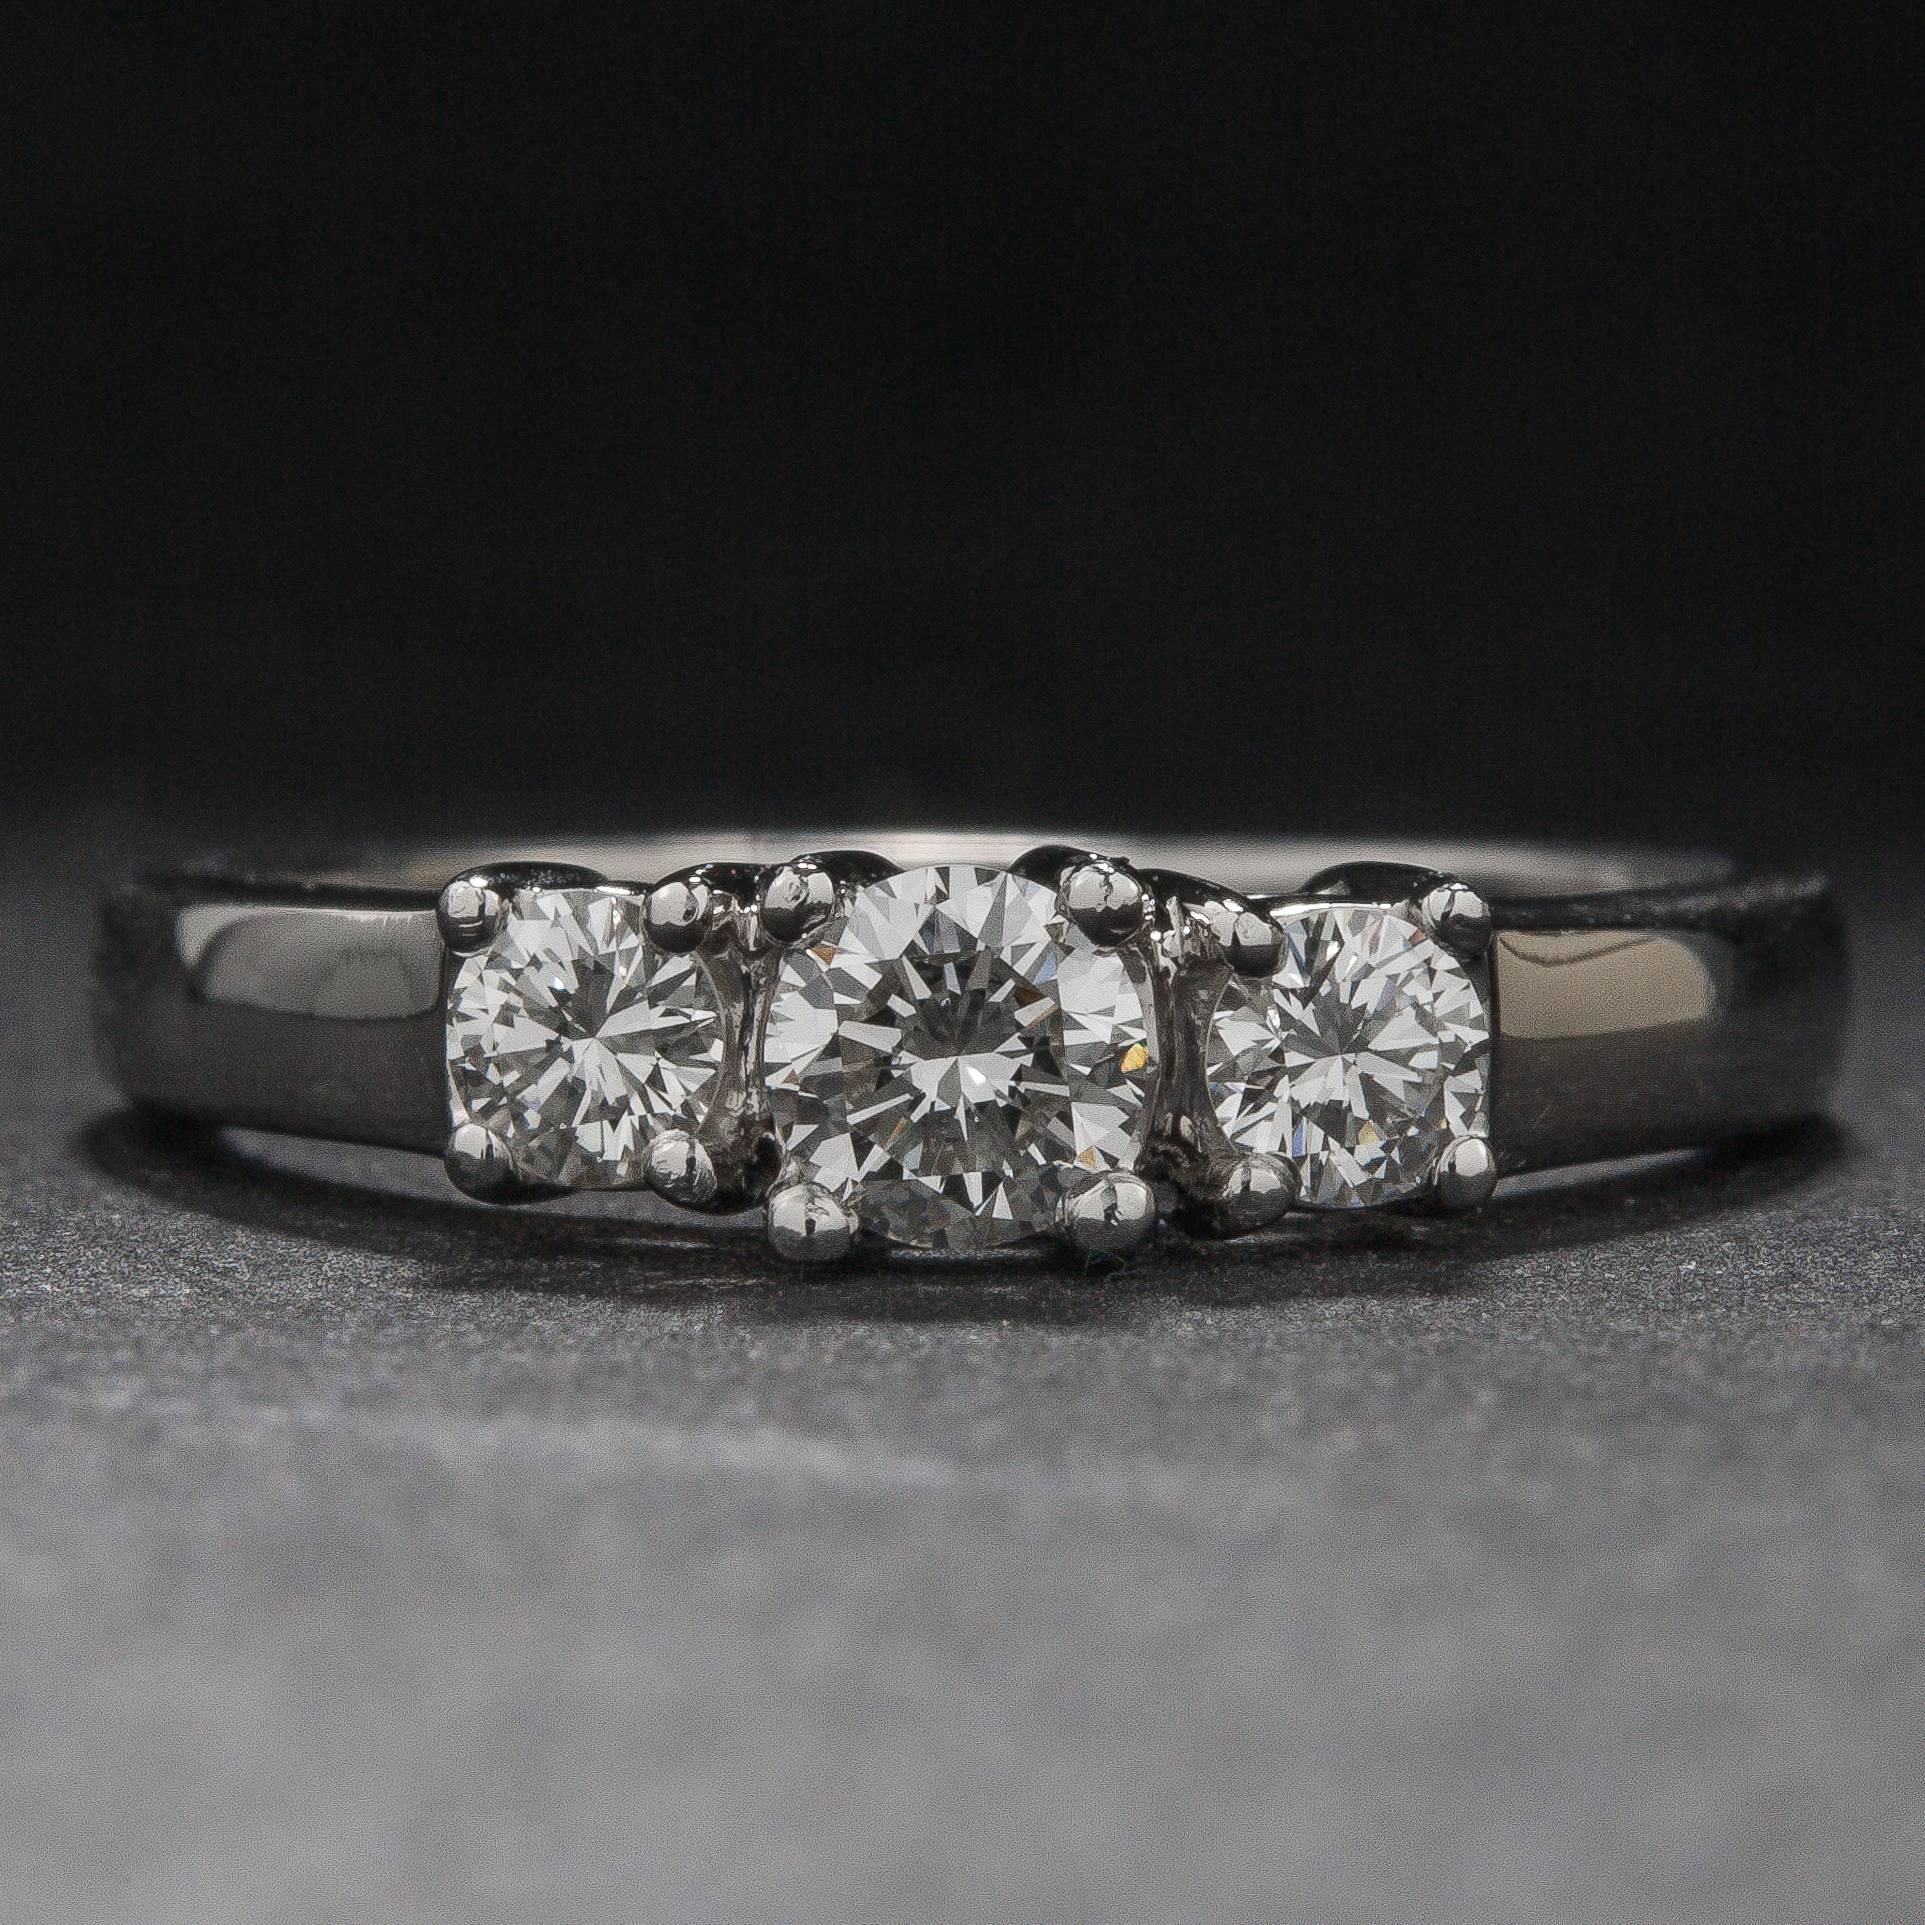 A beautiful three-stone diamond ring with three diamonds weighing a total of .71 carats. This classic mounting is crafted in platinum and the ring is currently size 7.